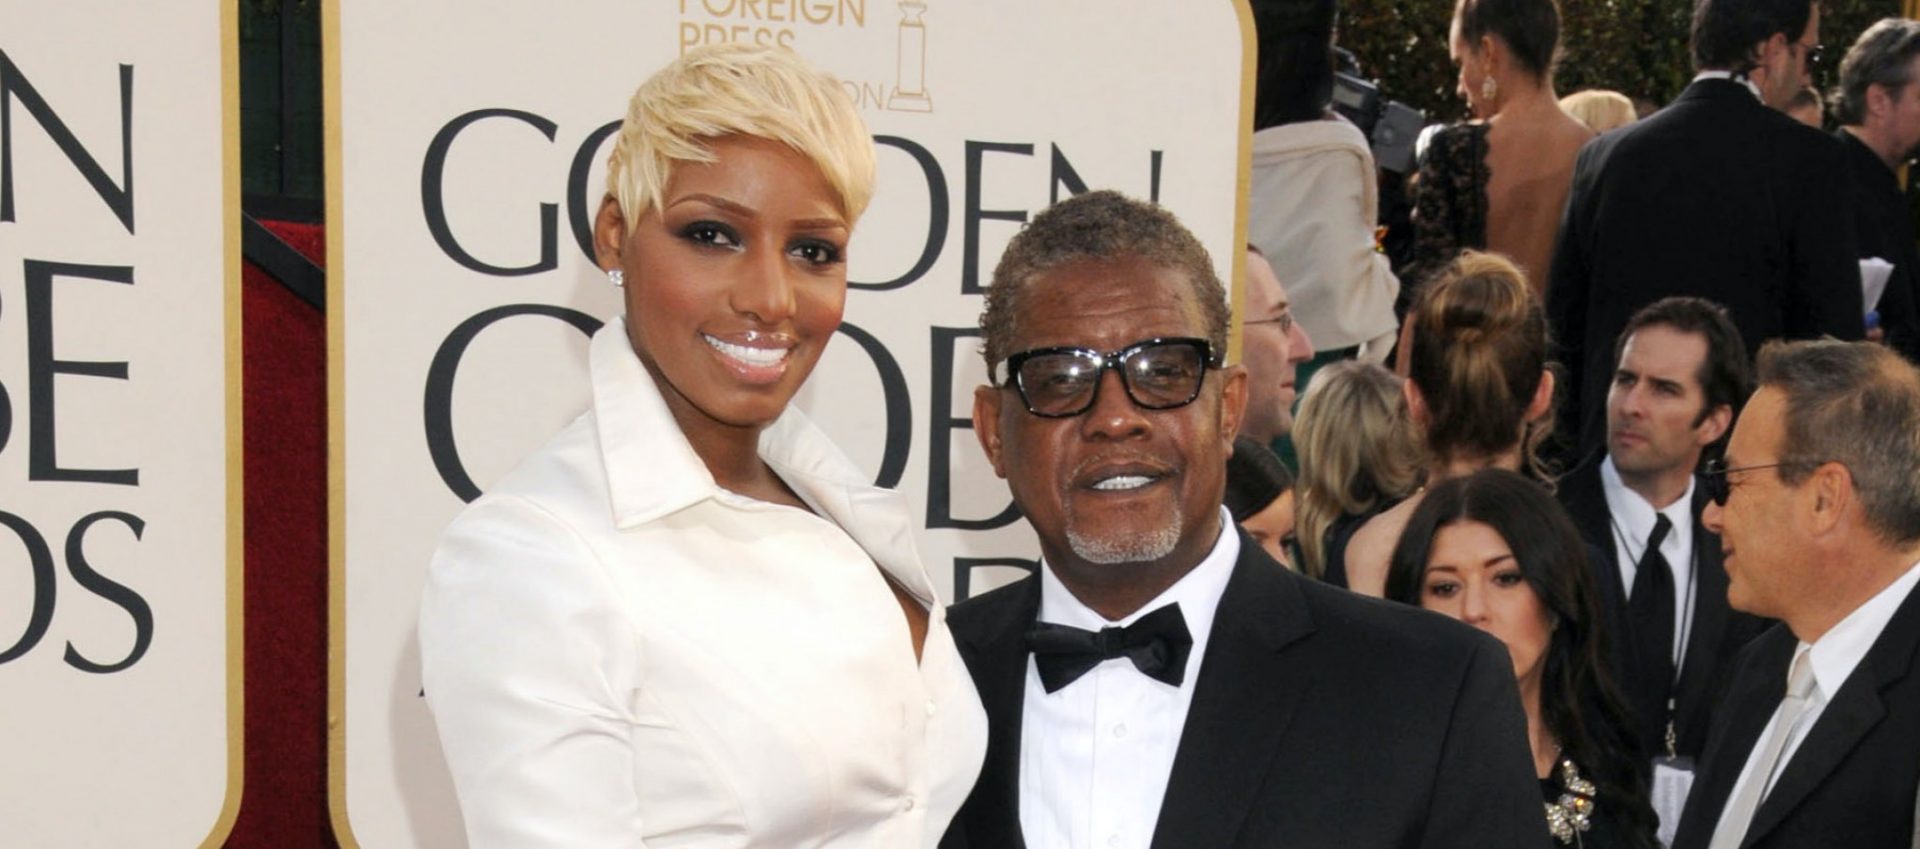 NeNe Leakes says late husband Gregg gave her permission to move on